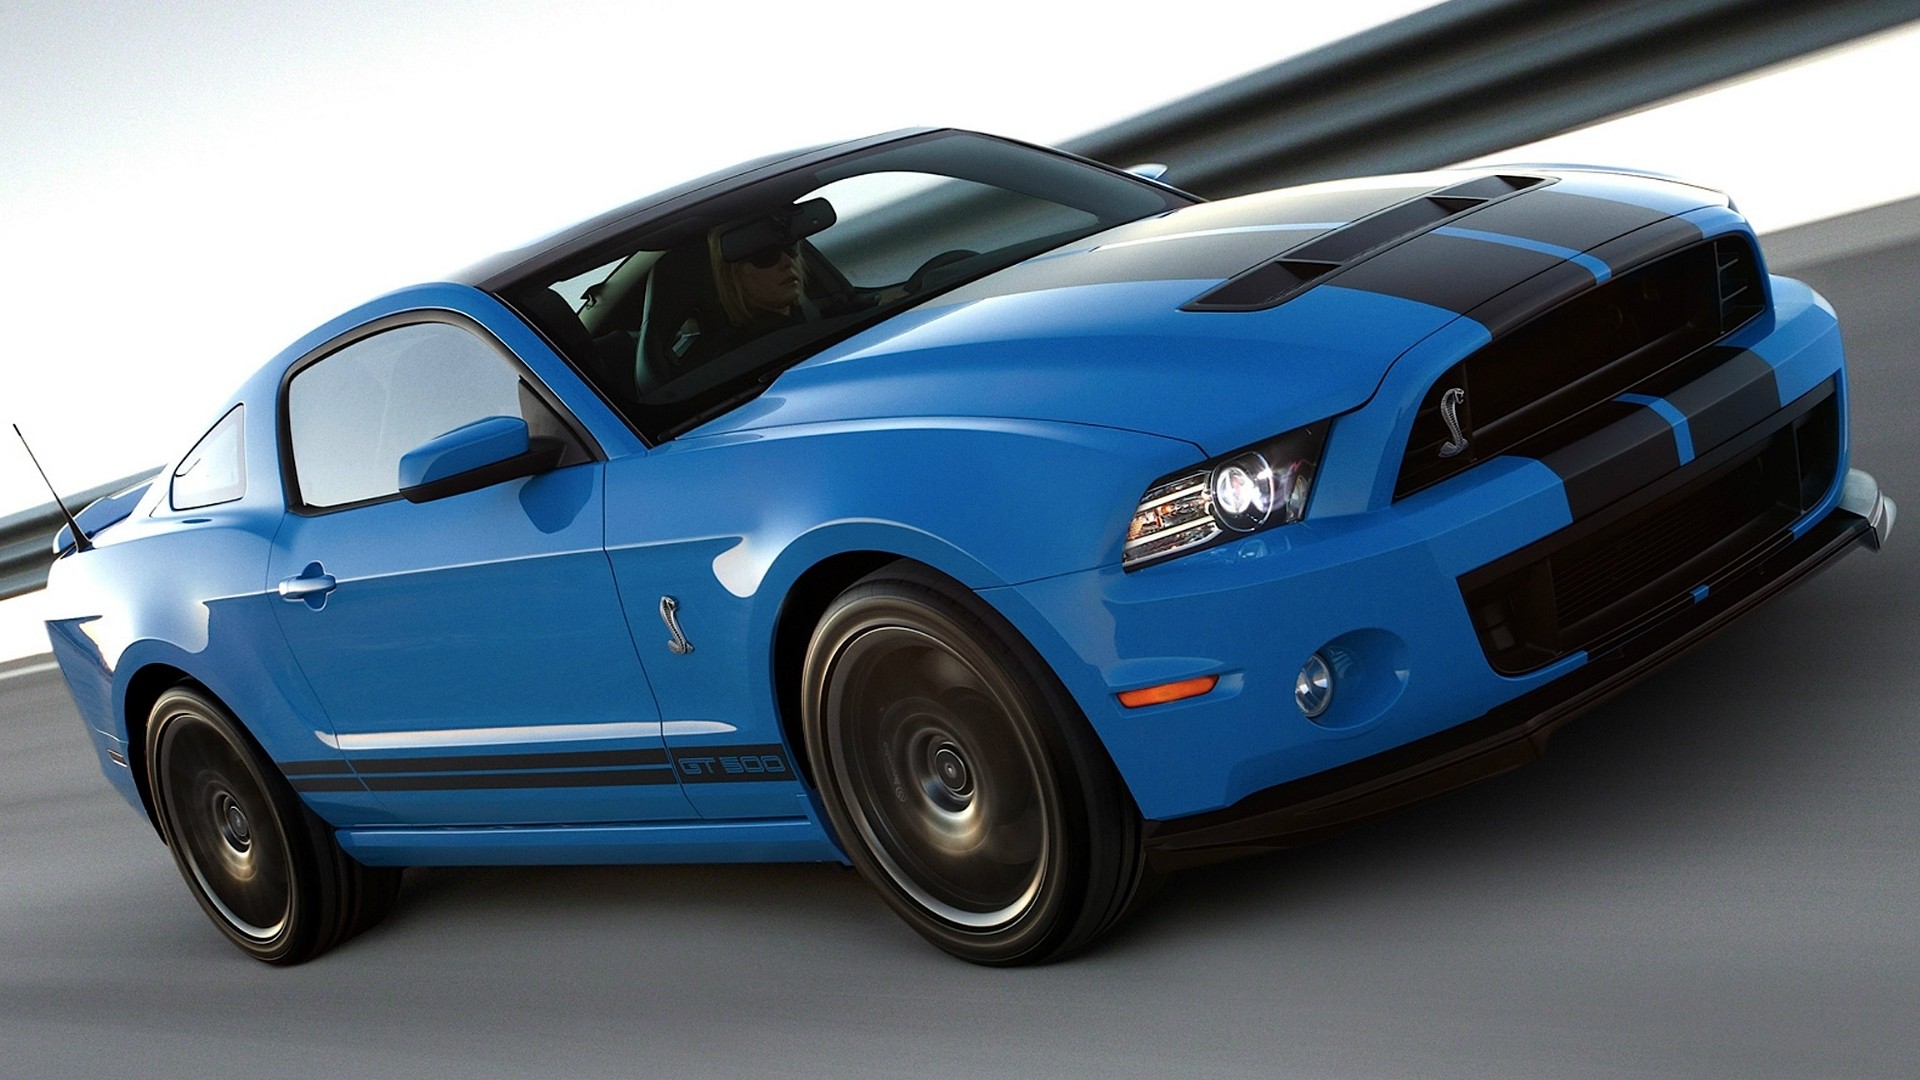  Ford Mustang Shelby GT500 HD Wallpaper Ford Mustang Shelby